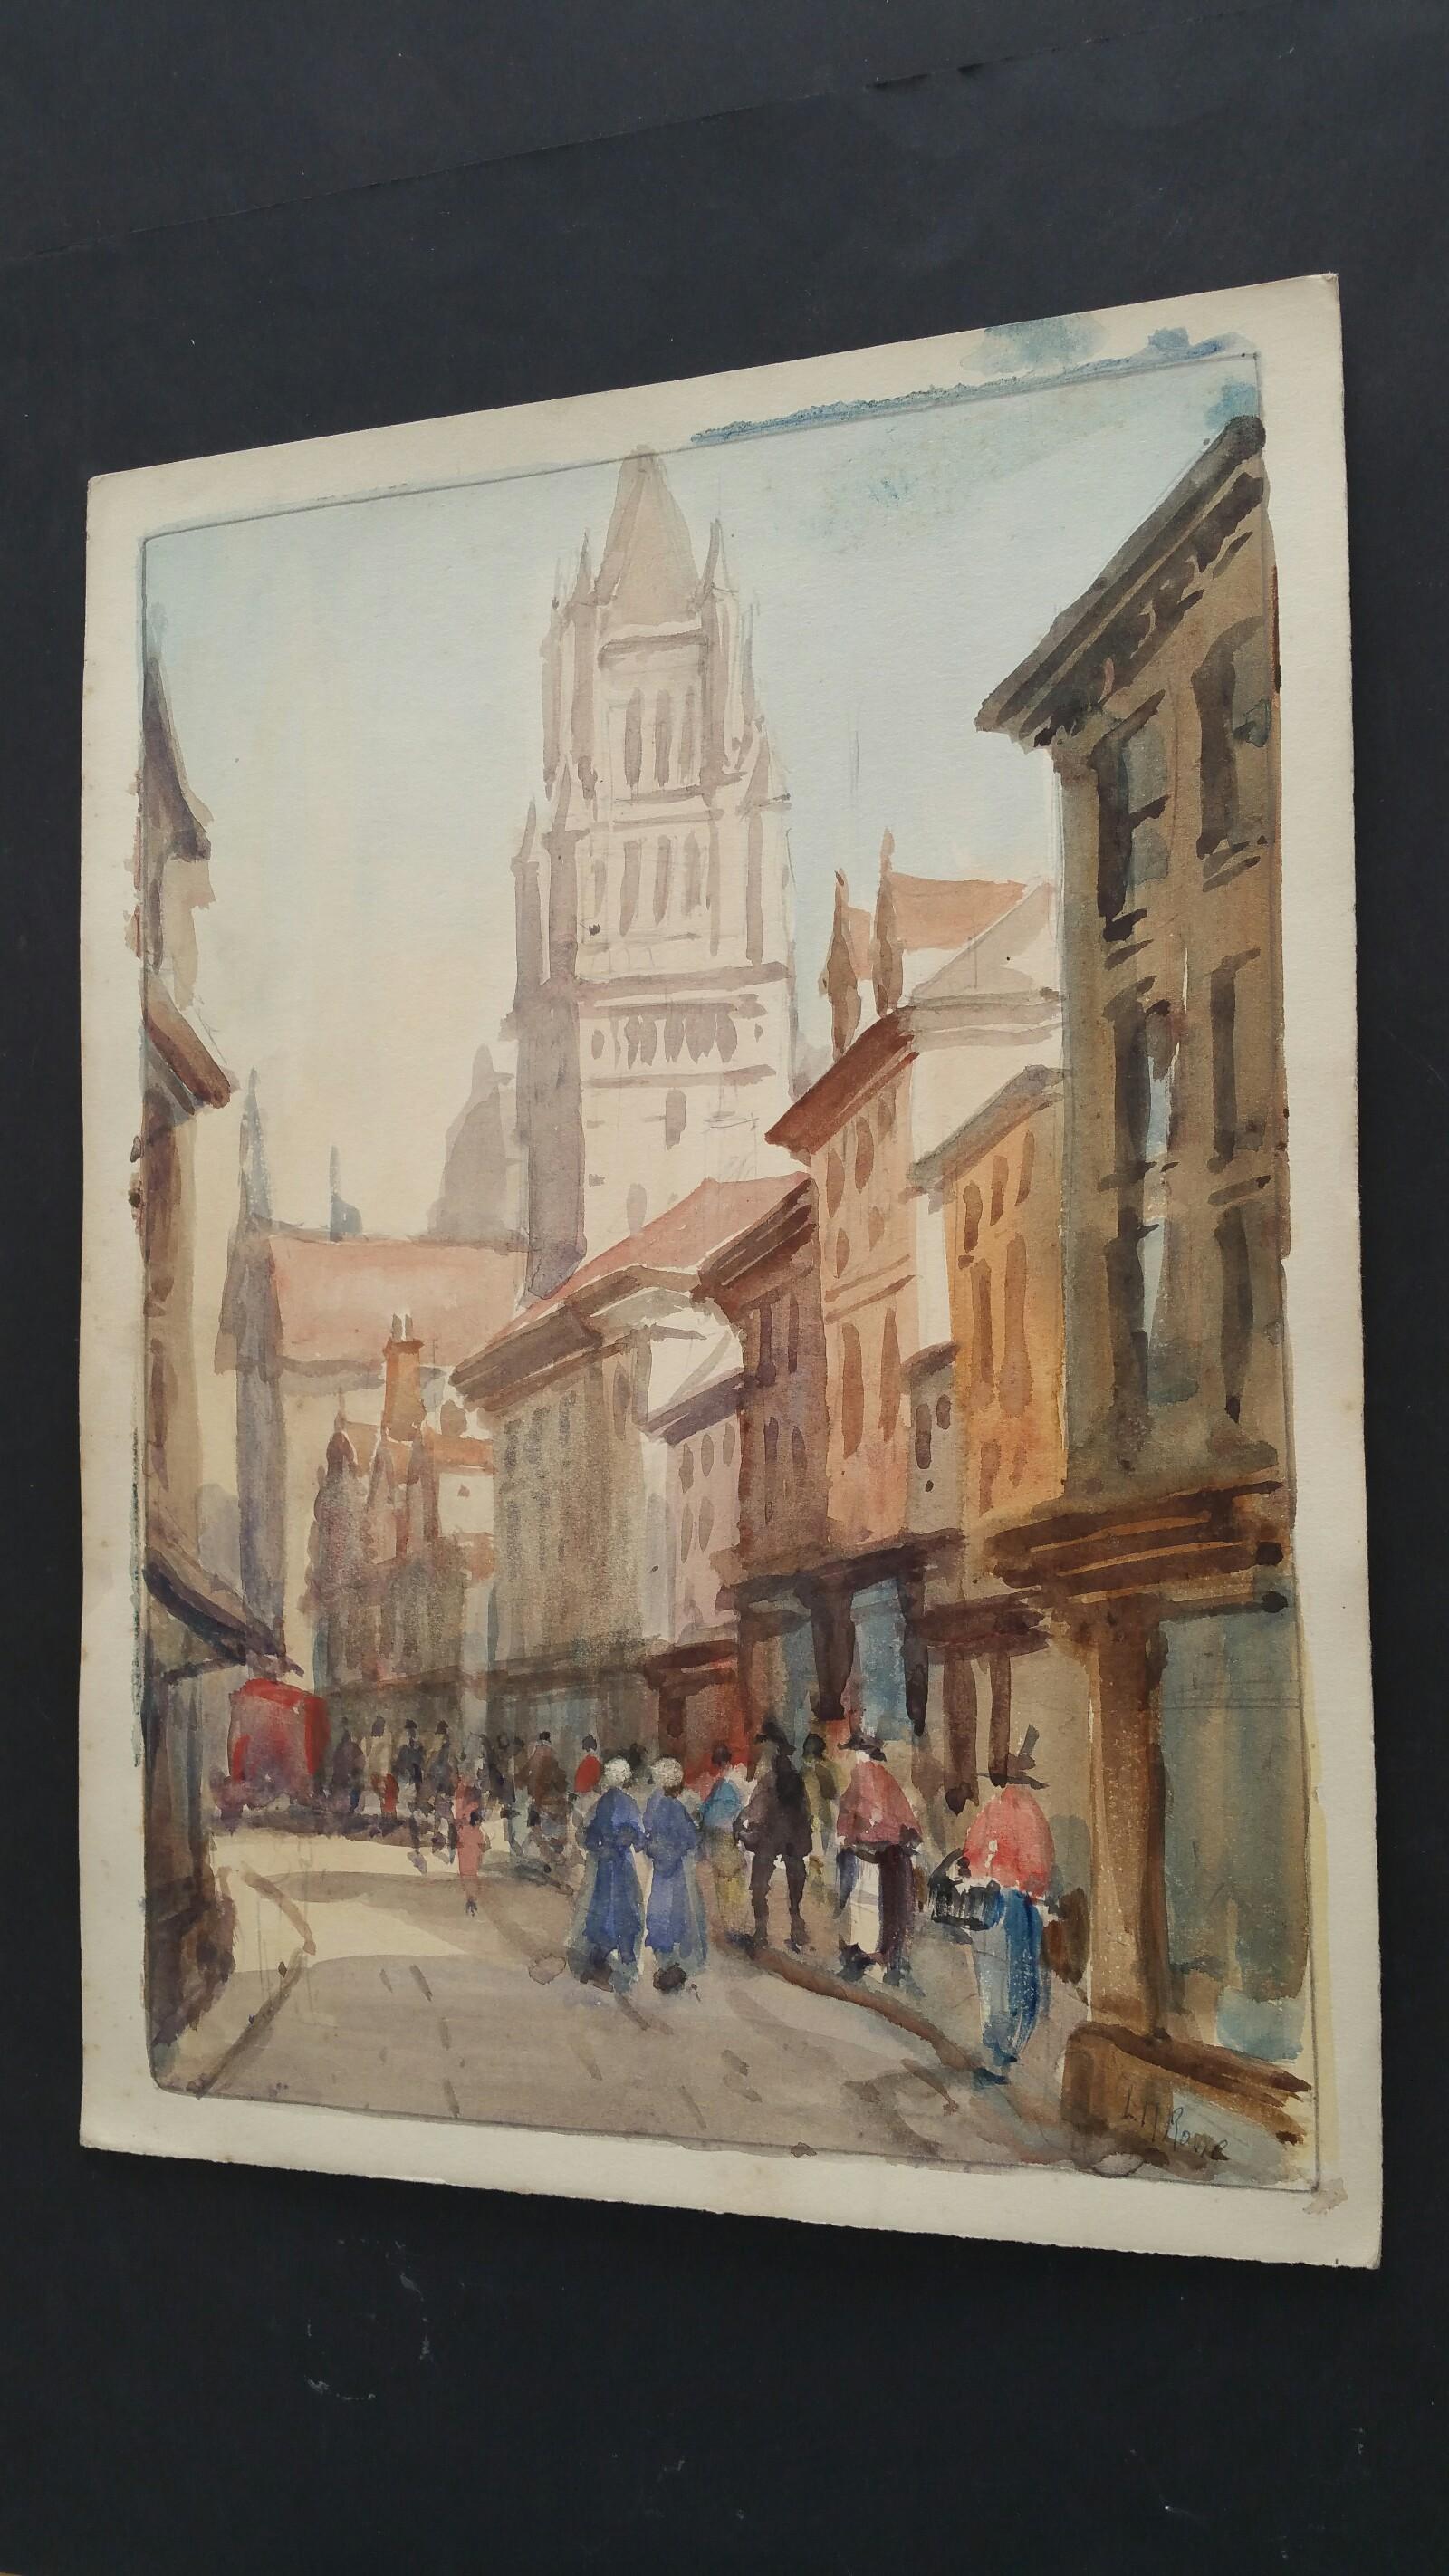 Belgium.  Bruges, St Saviours (St Salvator) Cathedral  
by Leonard Machin Rowe (1880-1968)
signed front lower right, inscribed to the back
watercolour painting on artist's paper, unframed

Image 13.75 x 9.75 inches, sheet 15 x 11 inches

Really